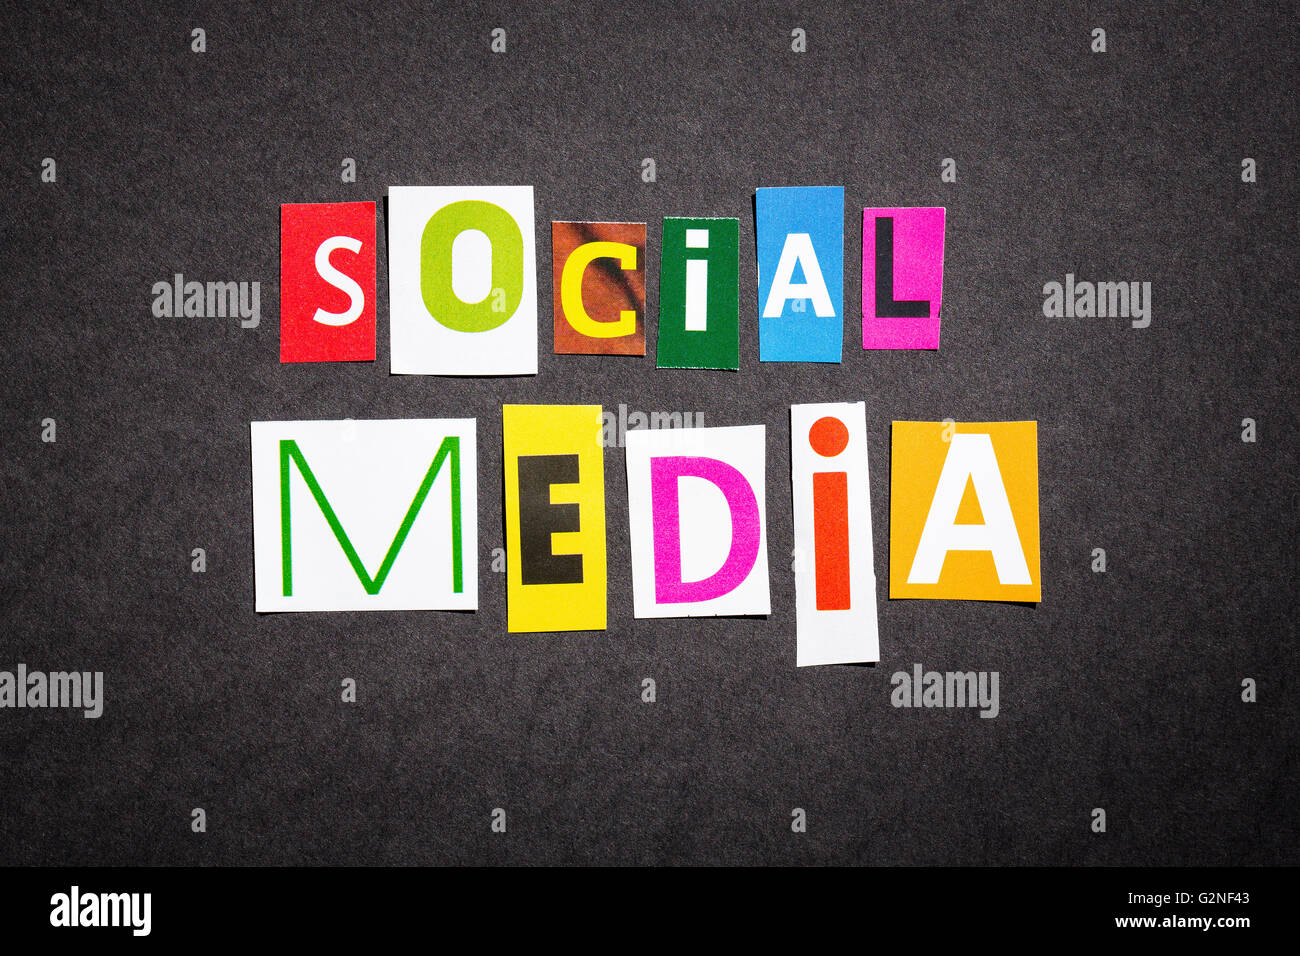 The colorful word social media in cut out magazine letters. Stock Photo